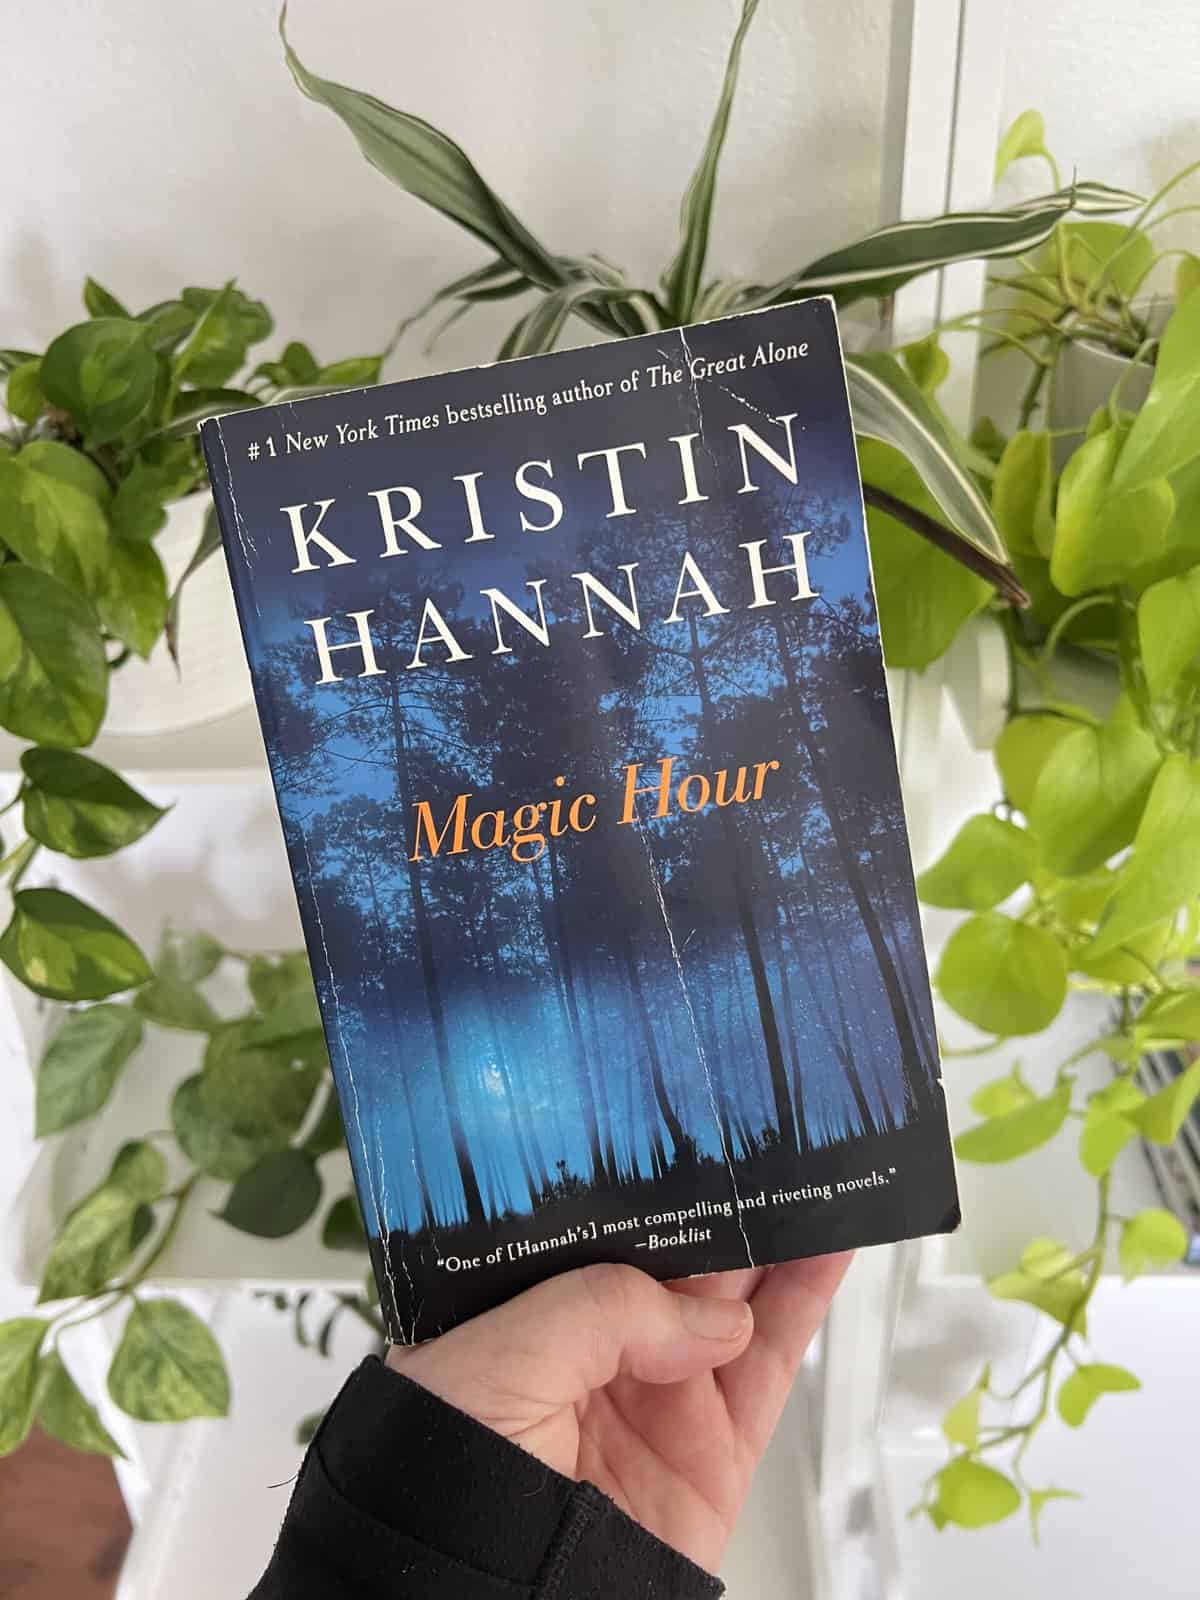 A paperback book copy of Magic Hour by Kristin Hannah with a bunch of green plants behind it.